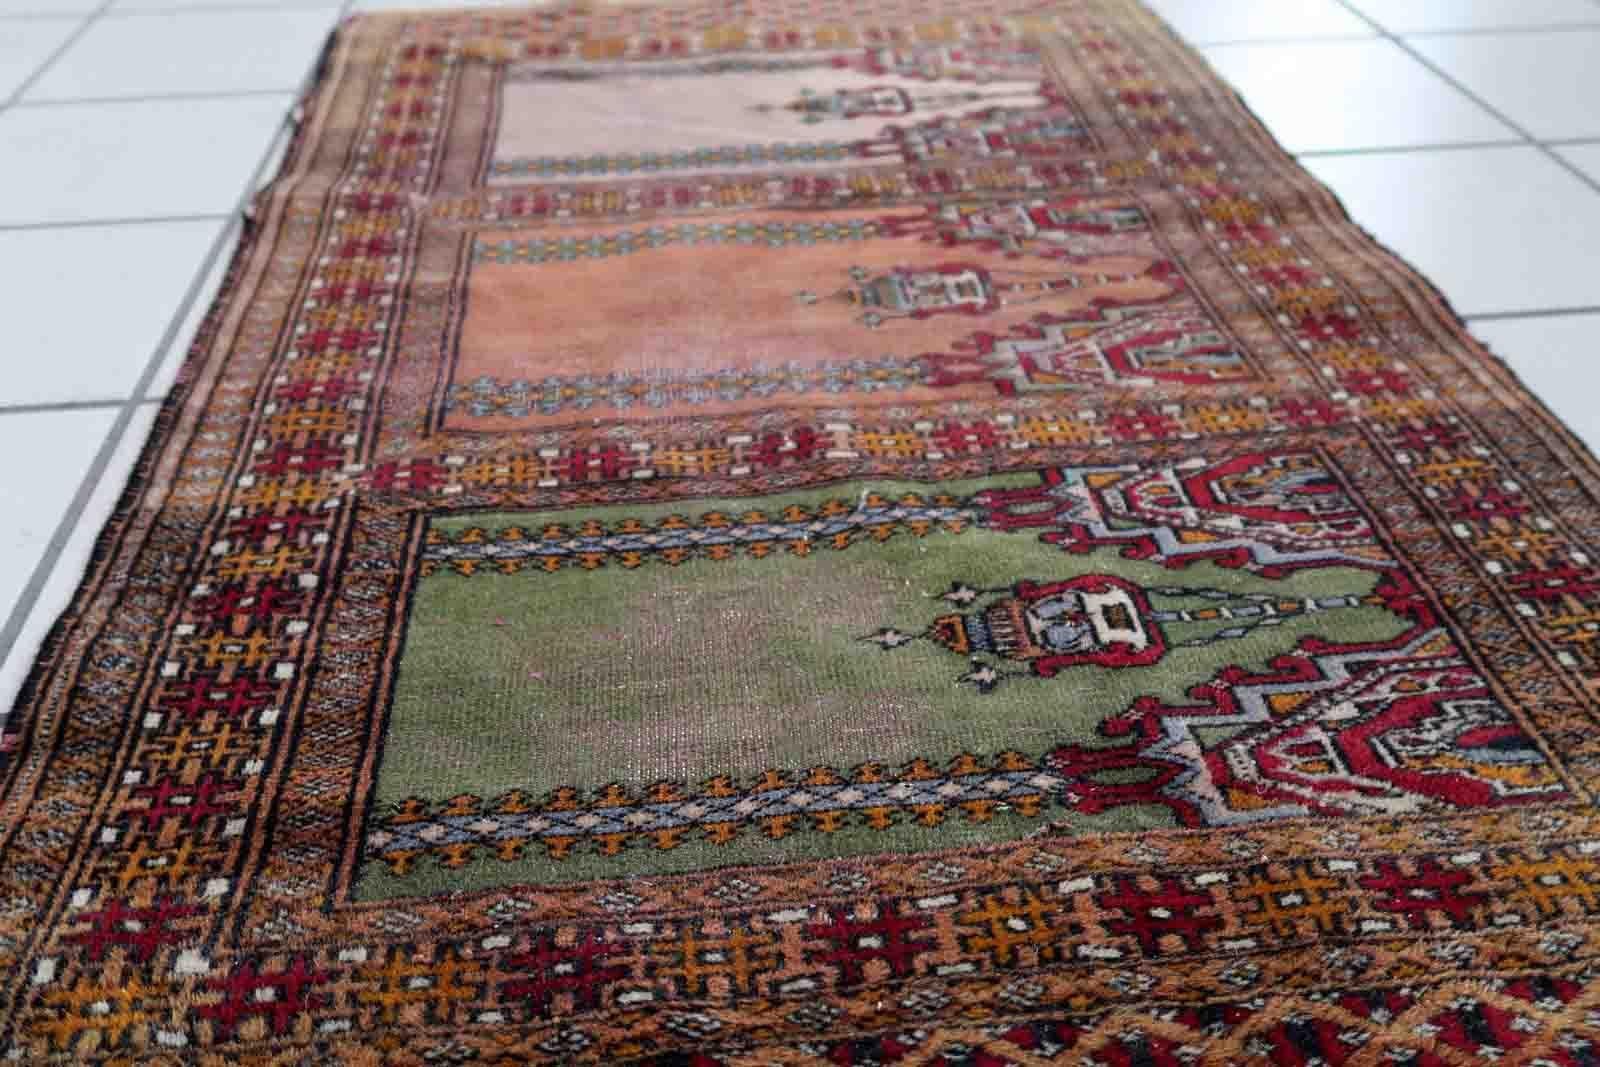 Handmade vintage Uzbek Bukhara rug in prayer design. The rug is from the middle of 20th century made in wool. The rug is in original condition, has some low pile

-condition: original, some low pile,

-circa: 1950s,

-size: 2' x 3.2' (63cm x